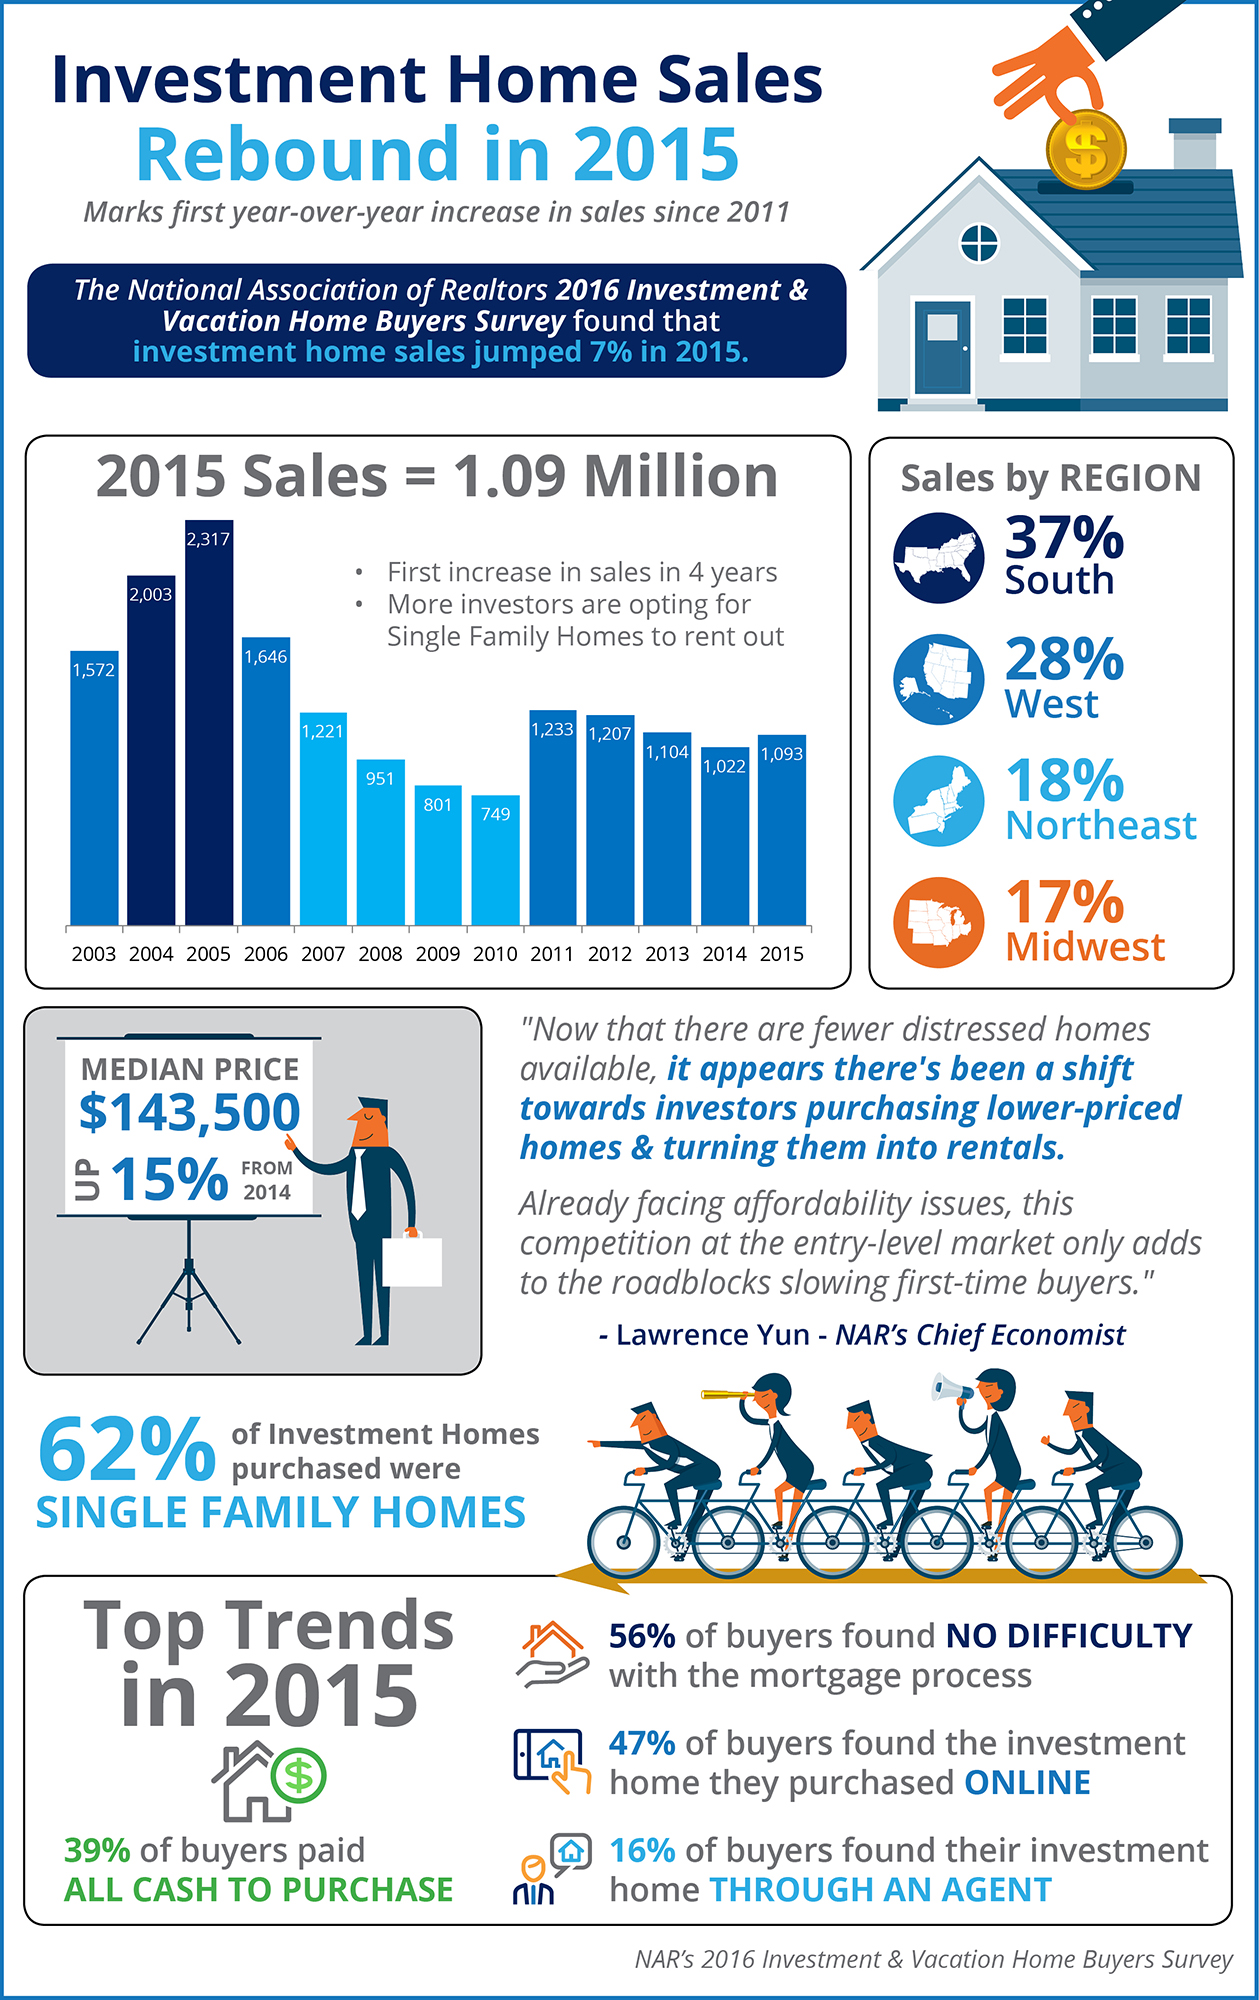 Investment Home Sales Rebound in 2015 | Simplifying The Market